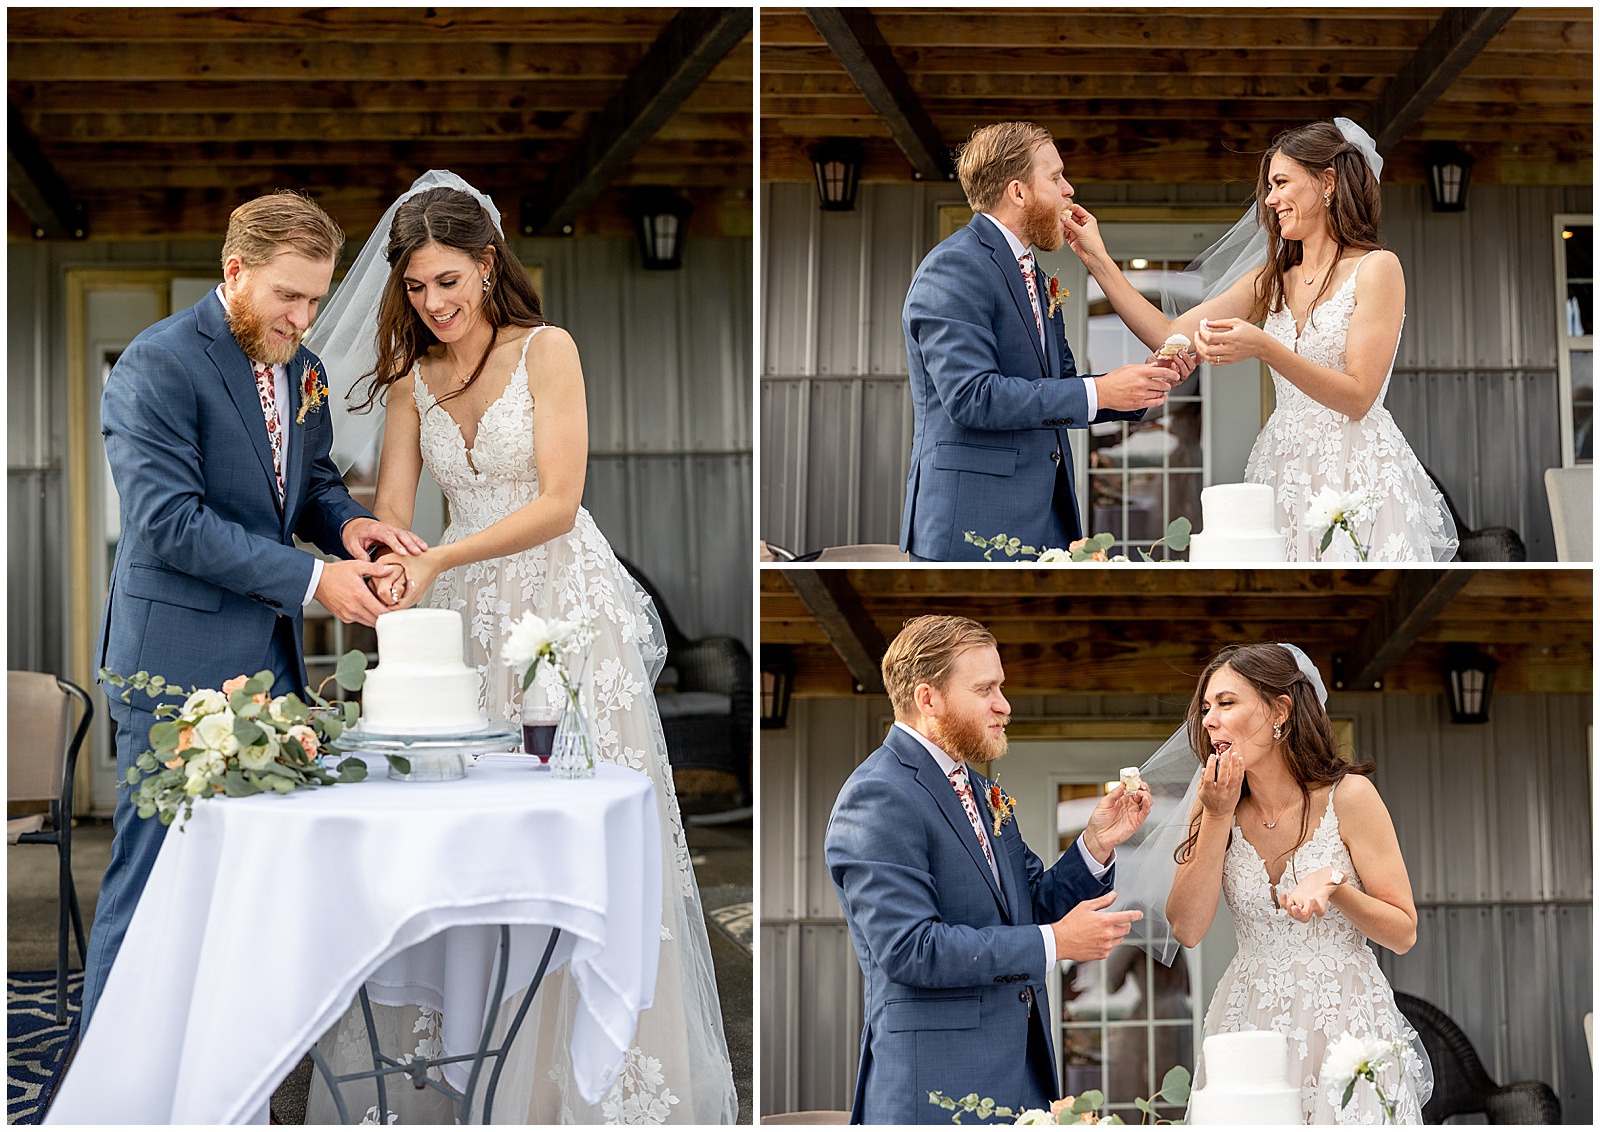 Wedding at Rustic River Winery in Lake View Iowa photographed by Iowa wedding photographer